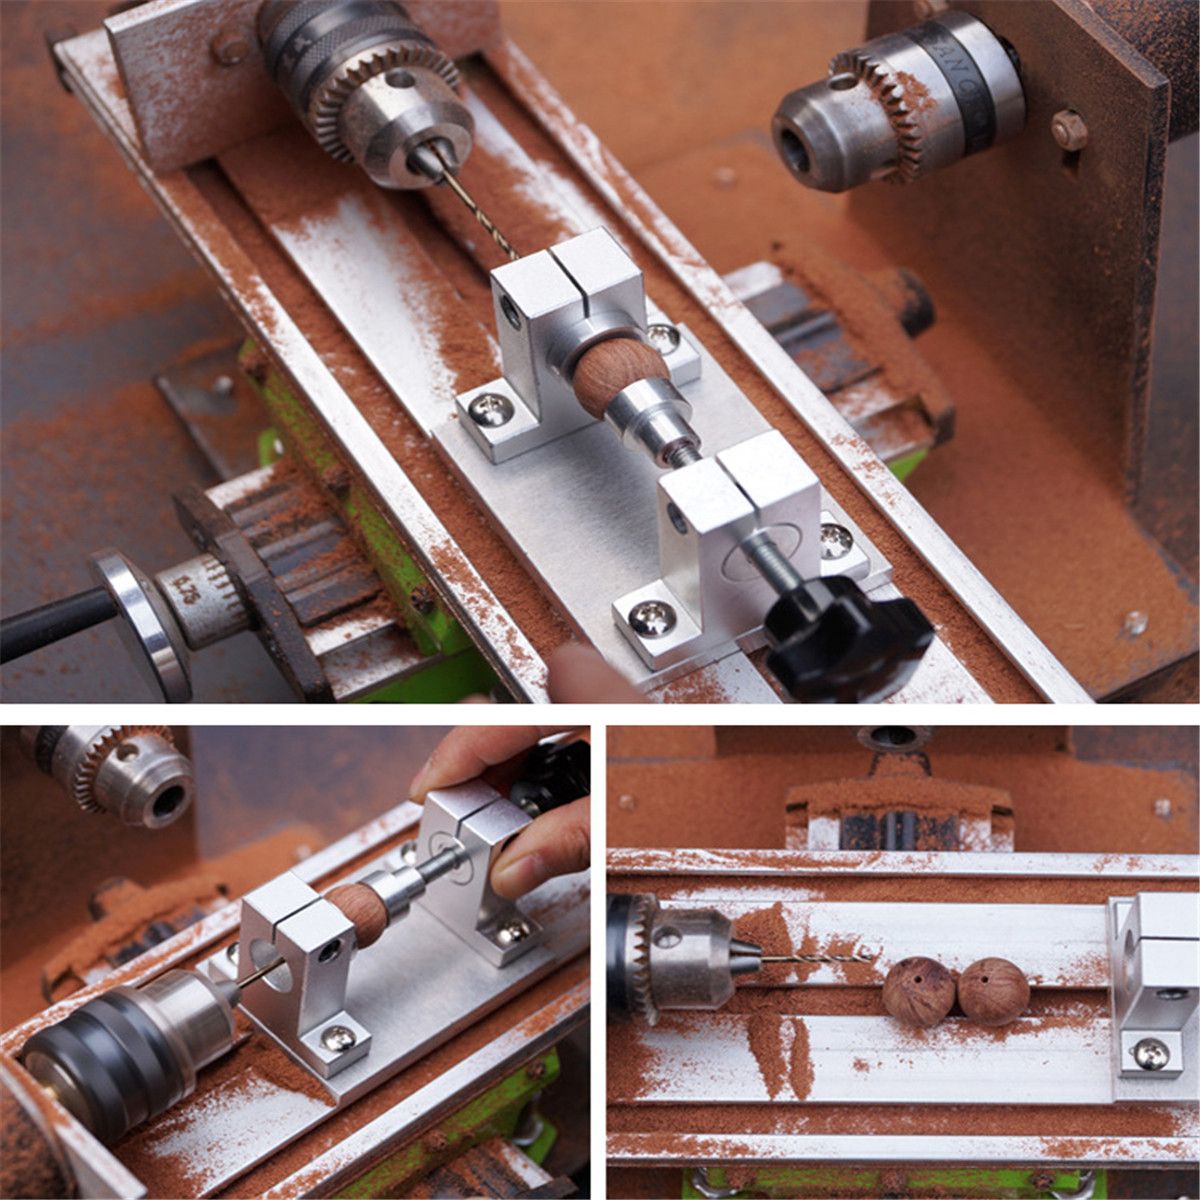 DIY-MINI-Wood-Beads-Lathe-Machine-Dual-Working-Drill-Sliding-Compound-Router-Table-1522707